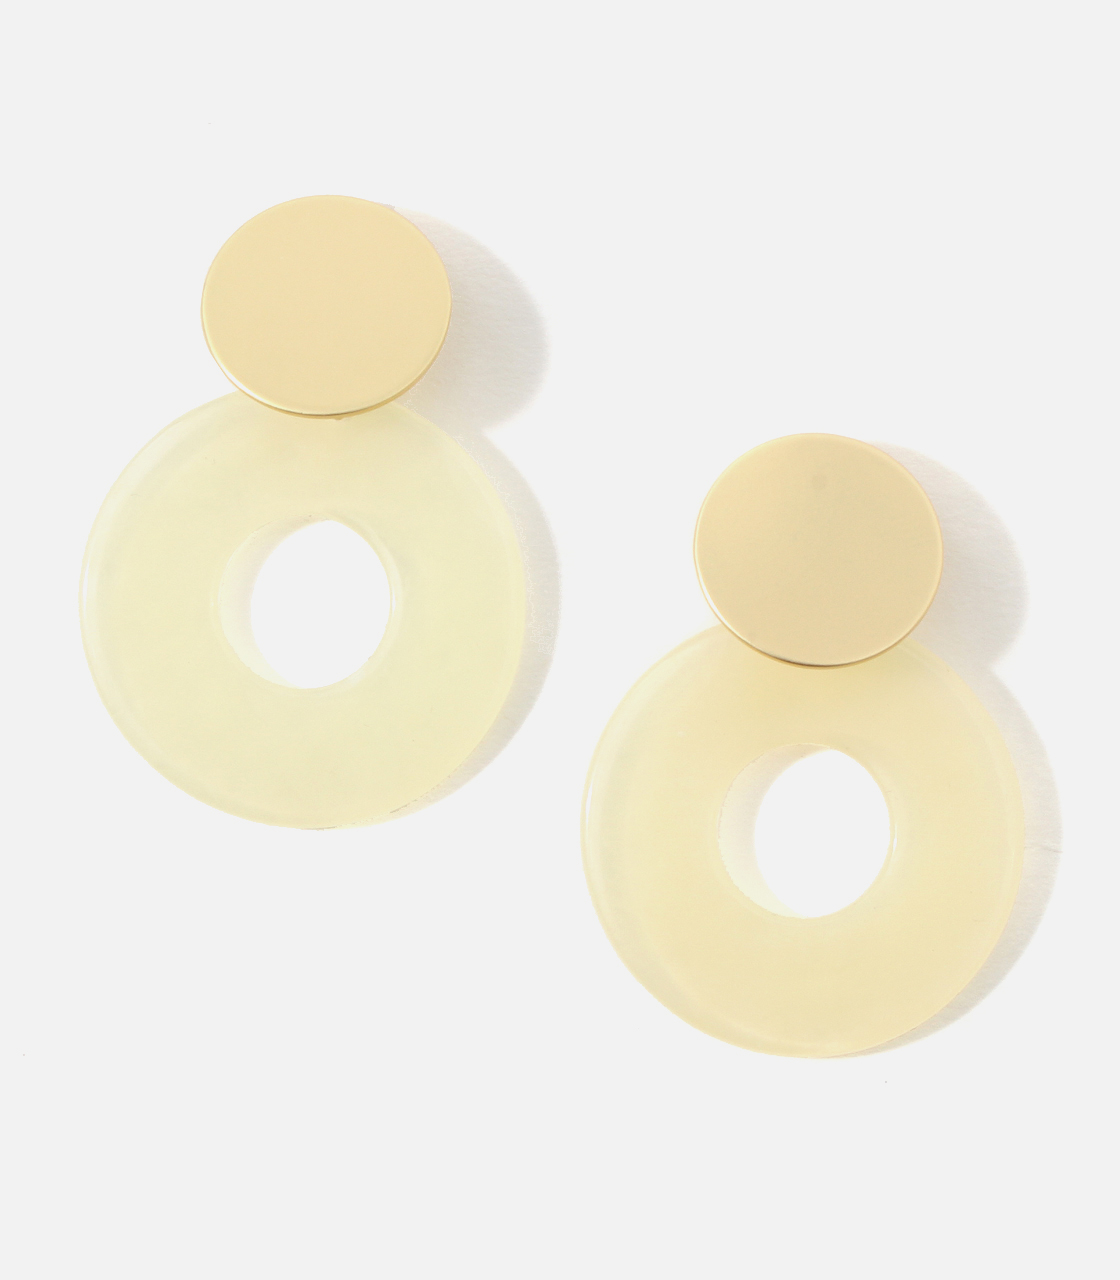 CIRCLE MARBLE EARRINGS/サークルマーブルピアス 詳細画像 O/WHT 1